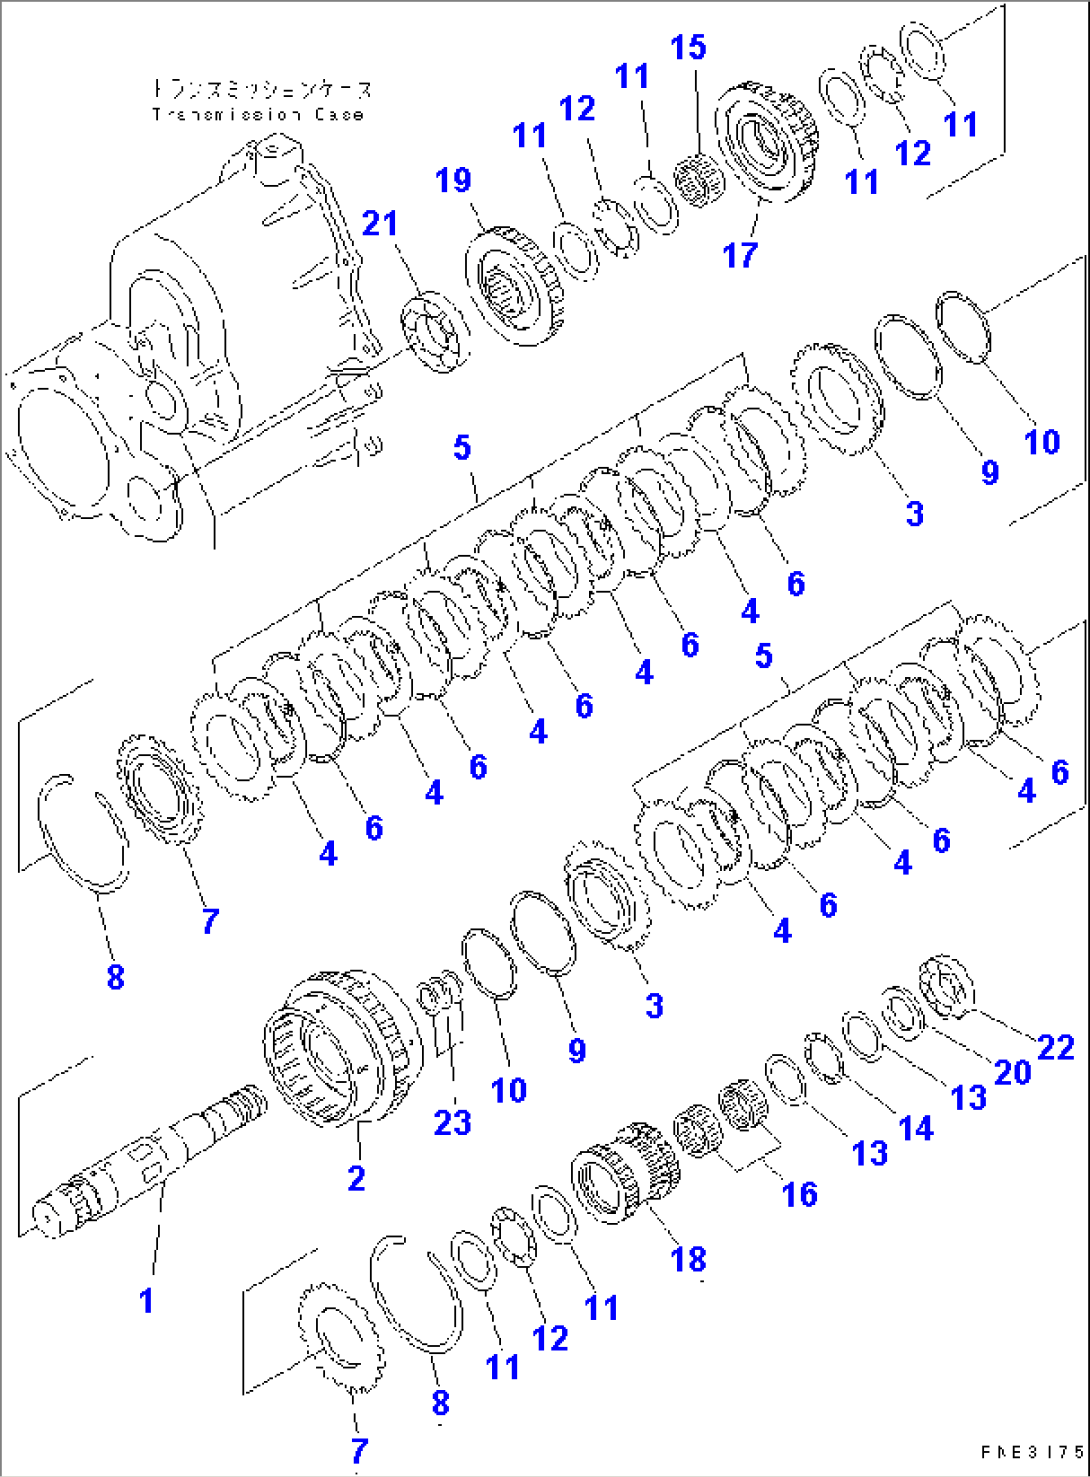 TRANSMISSION (2ND AND 3RD CLUTCH)